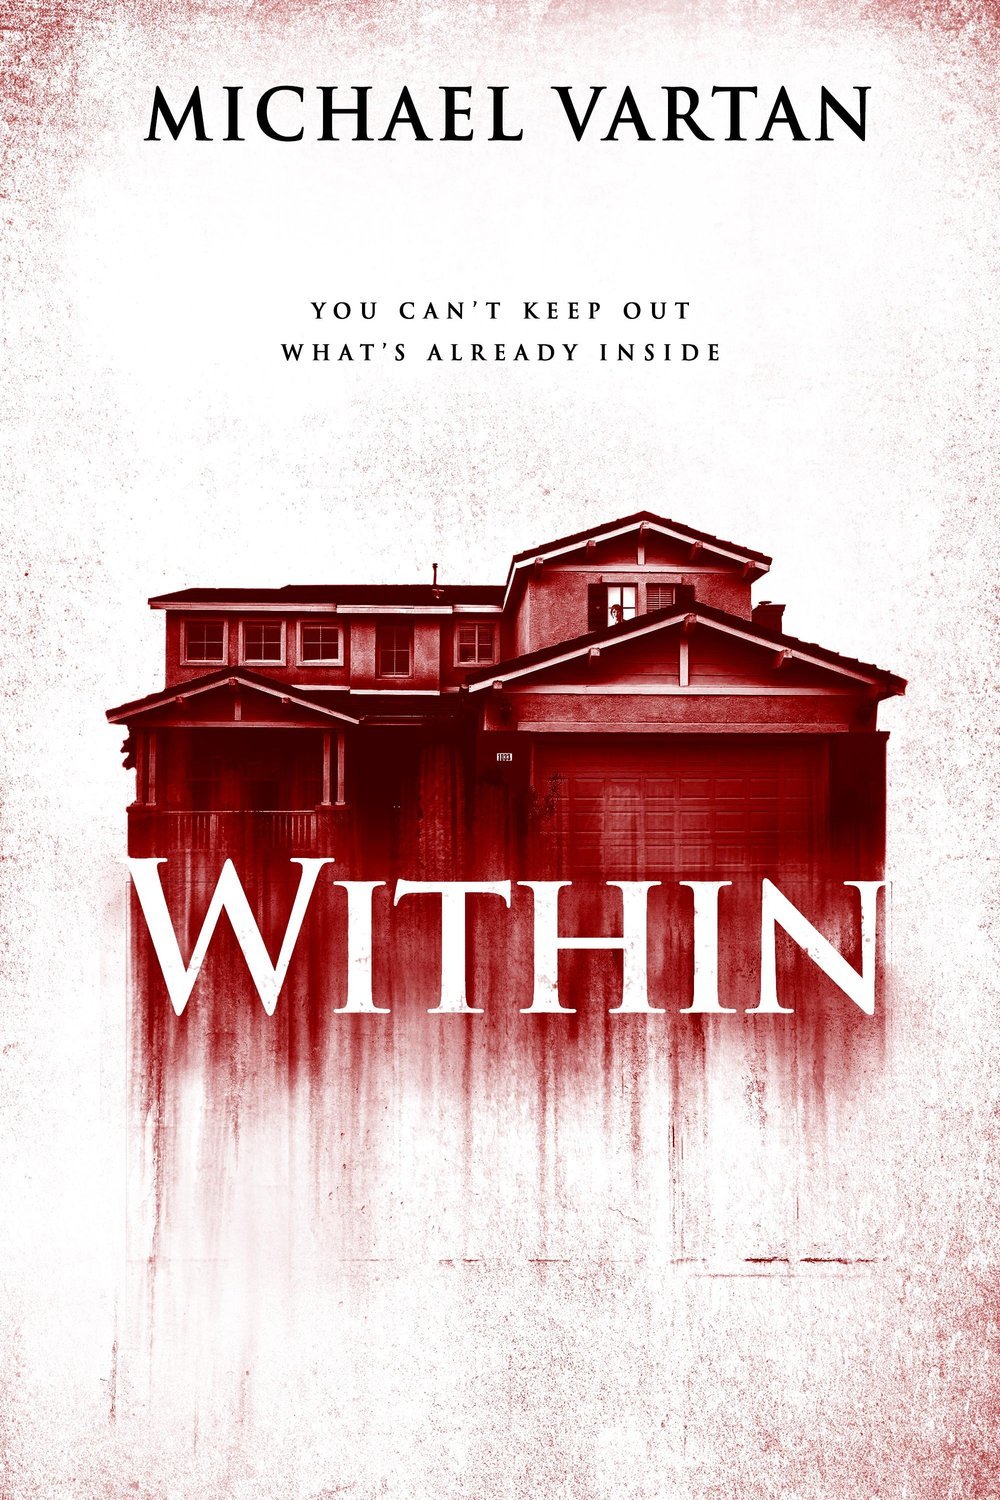 Poster of the movie Within